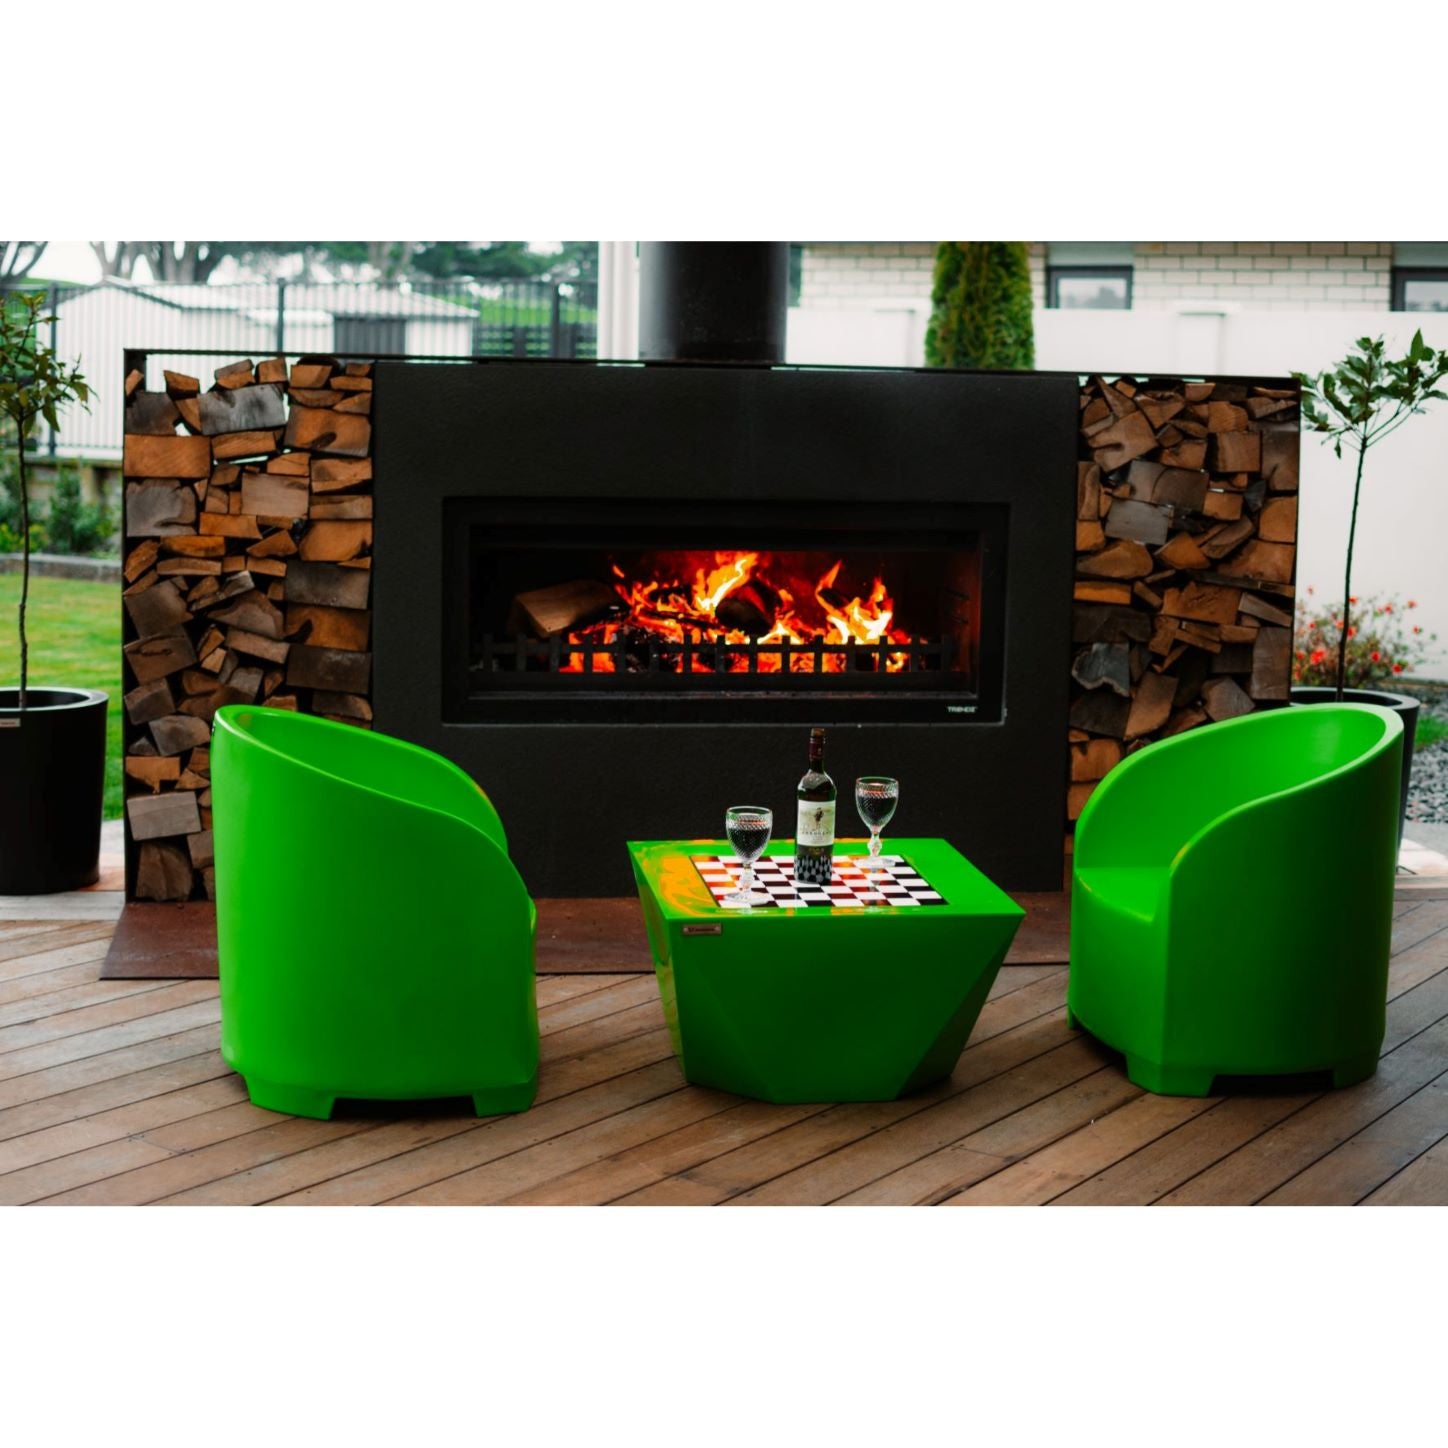 Lime green outdoor furniture on a deck in front of a Trendz Outdoors fireplace.